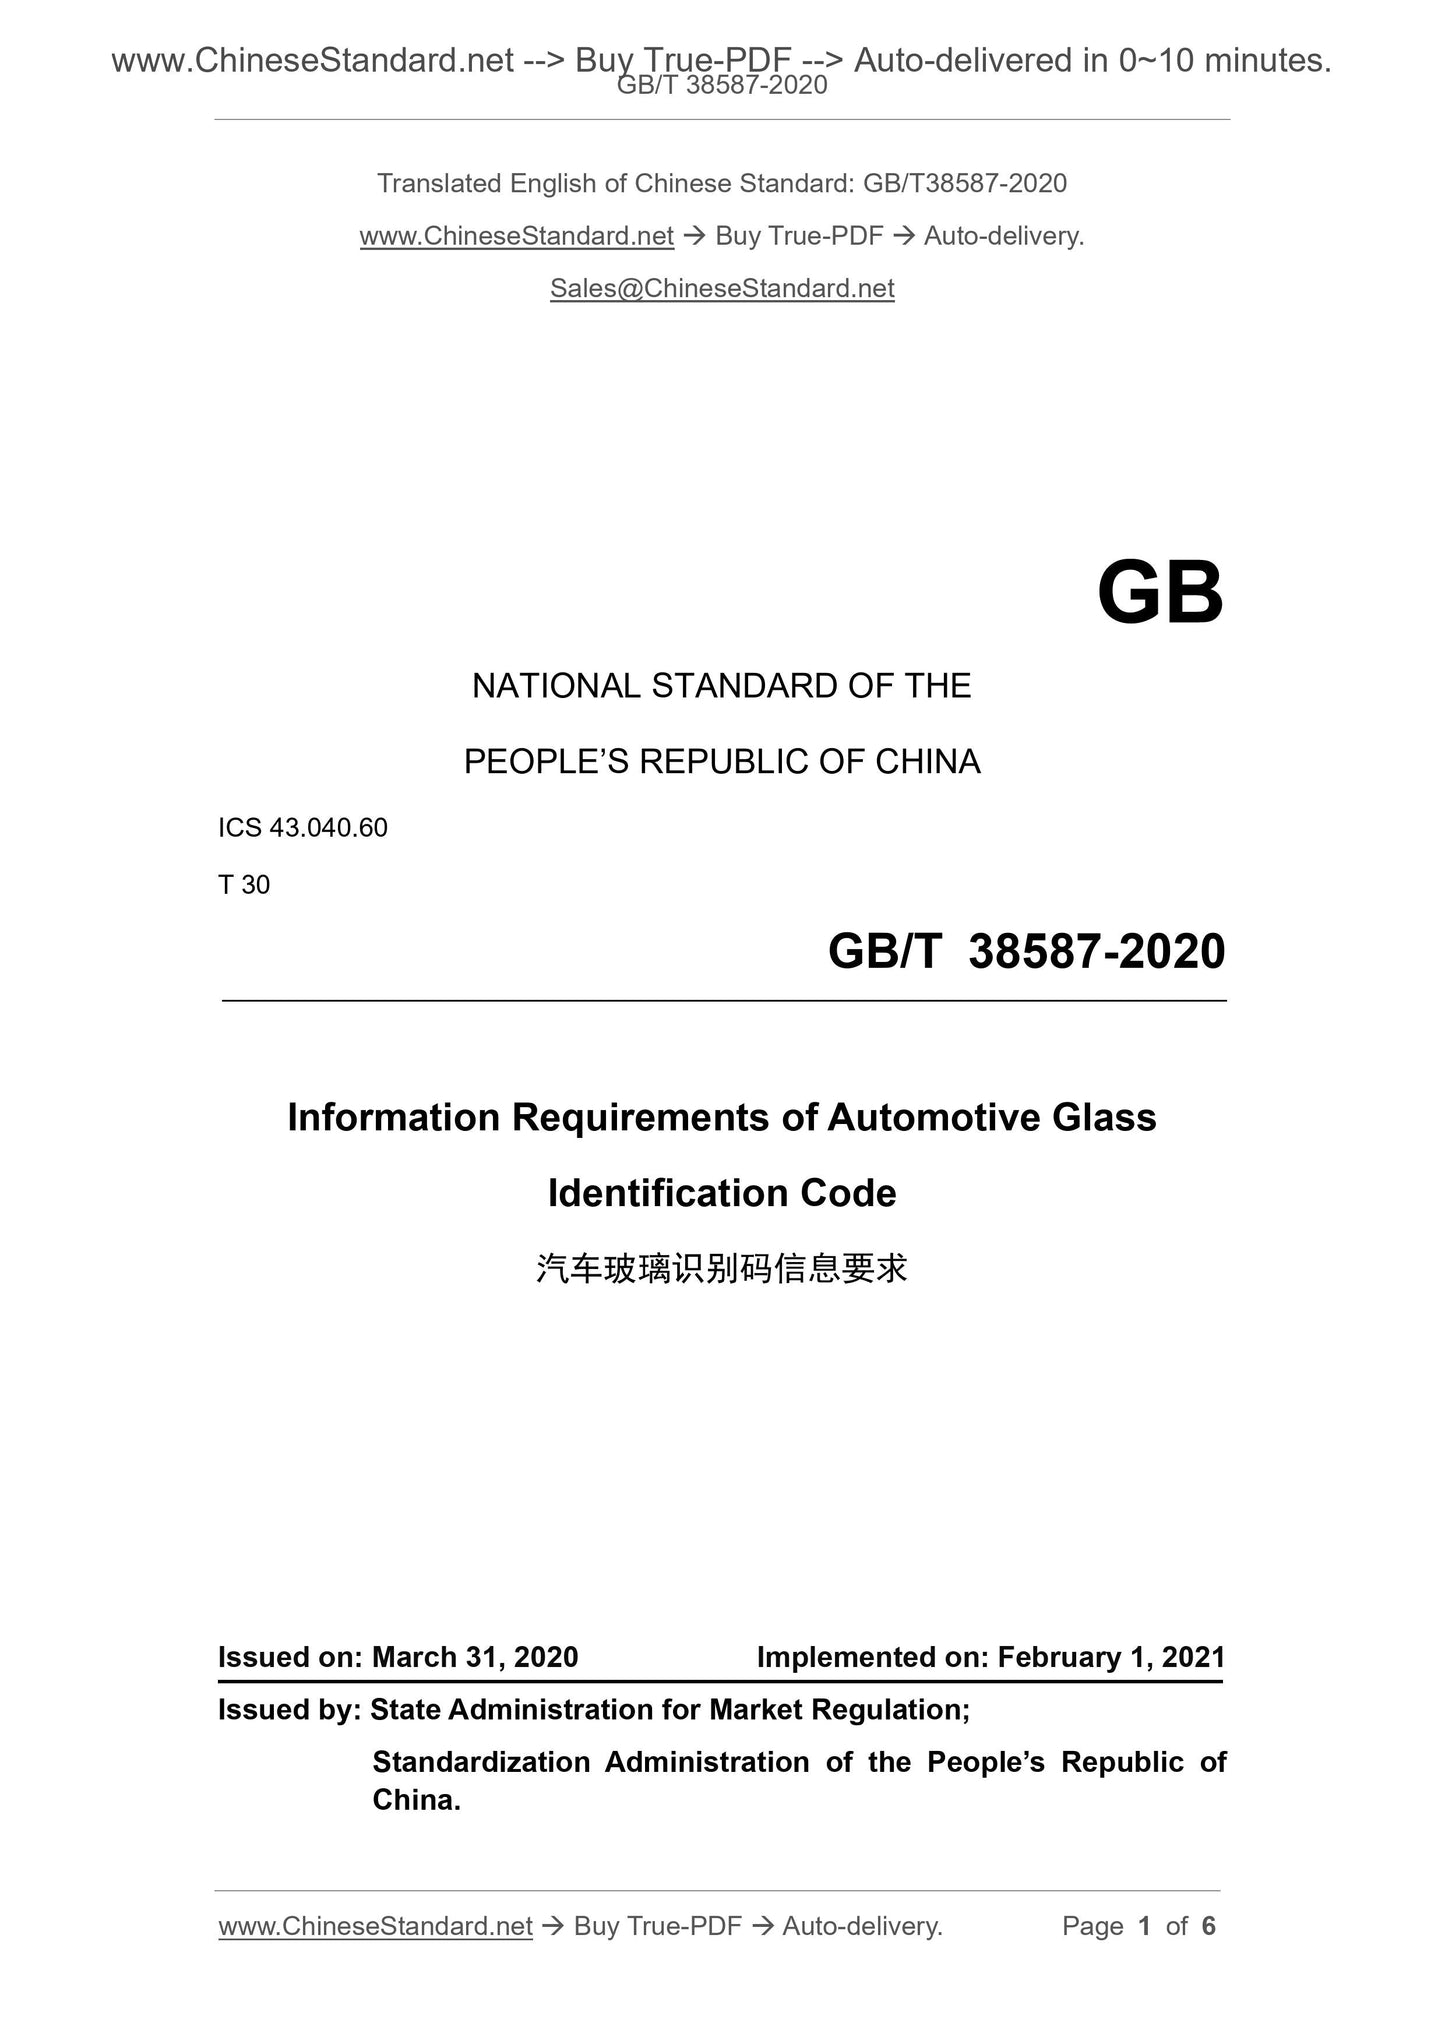 GB/T 38587-2020 Page 1